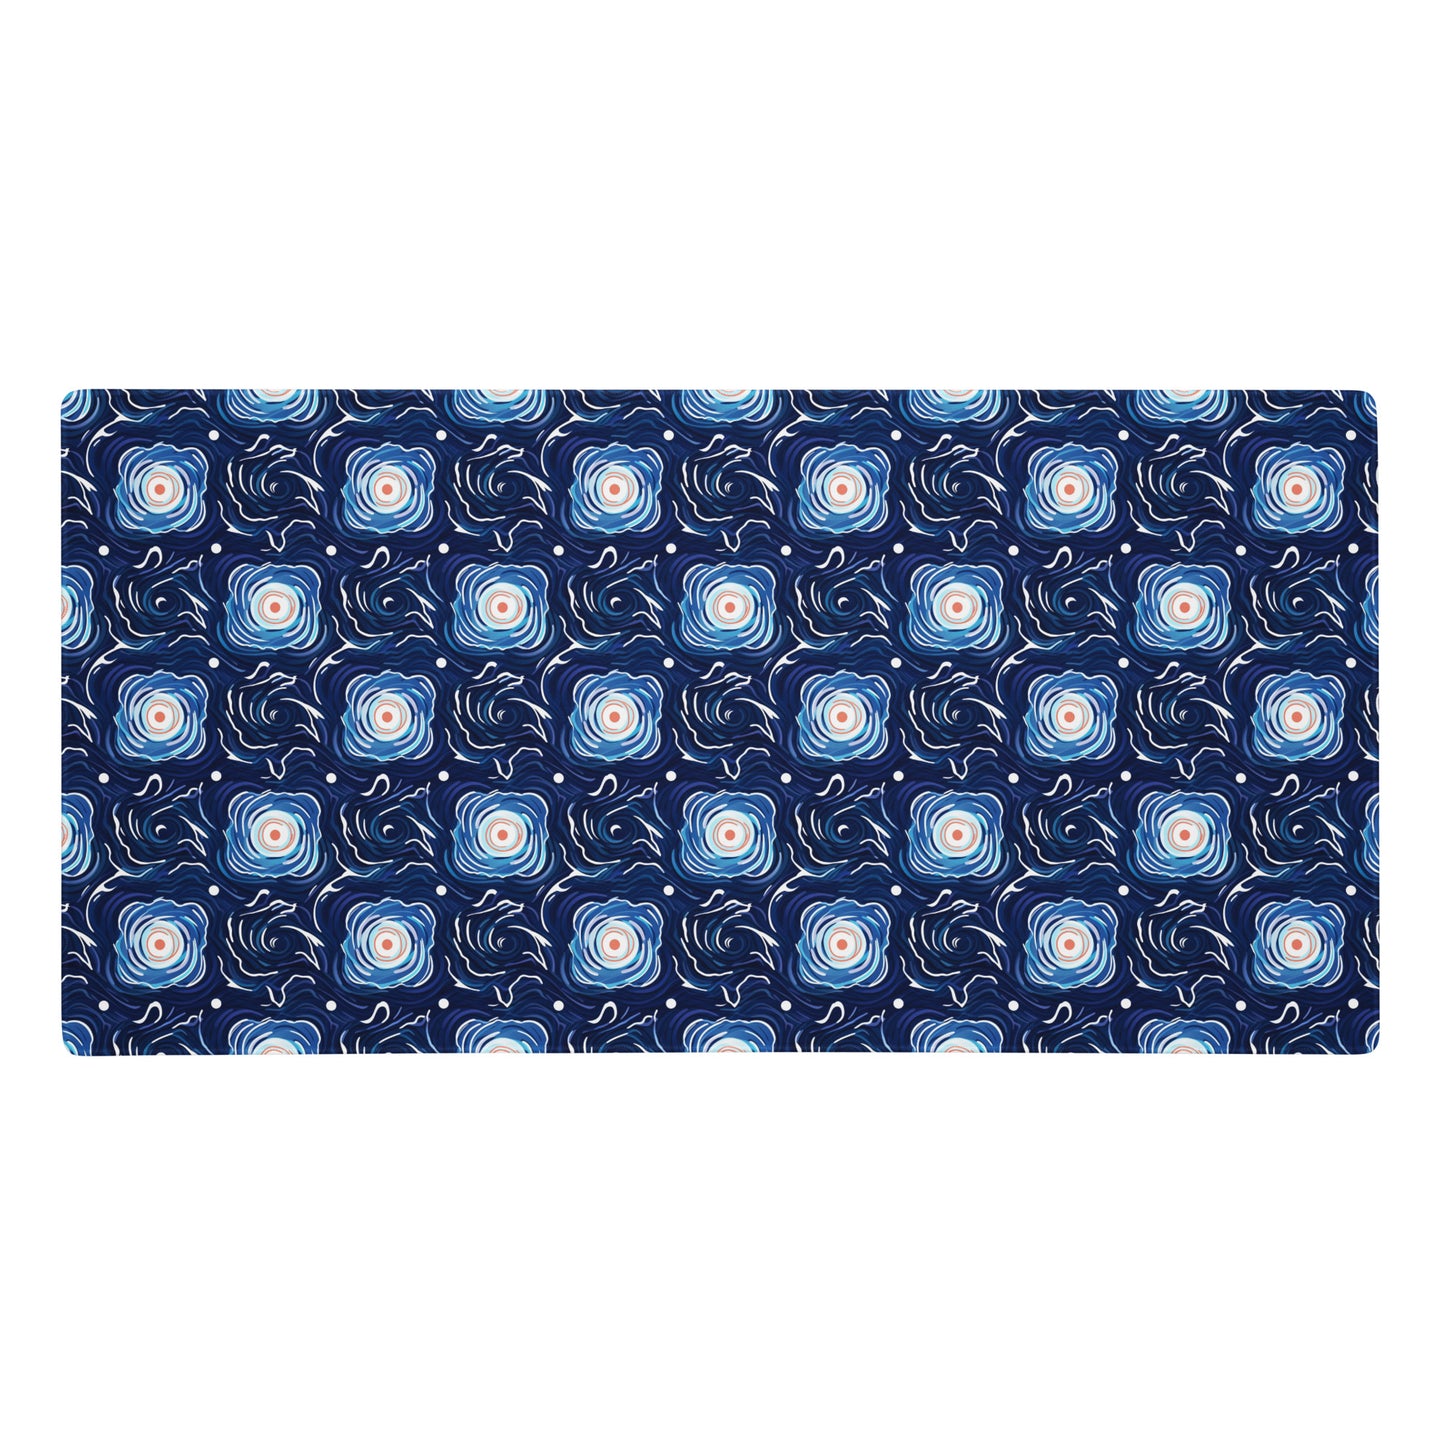 A 36" x 18" desk pad with a blue and white floral pattern.